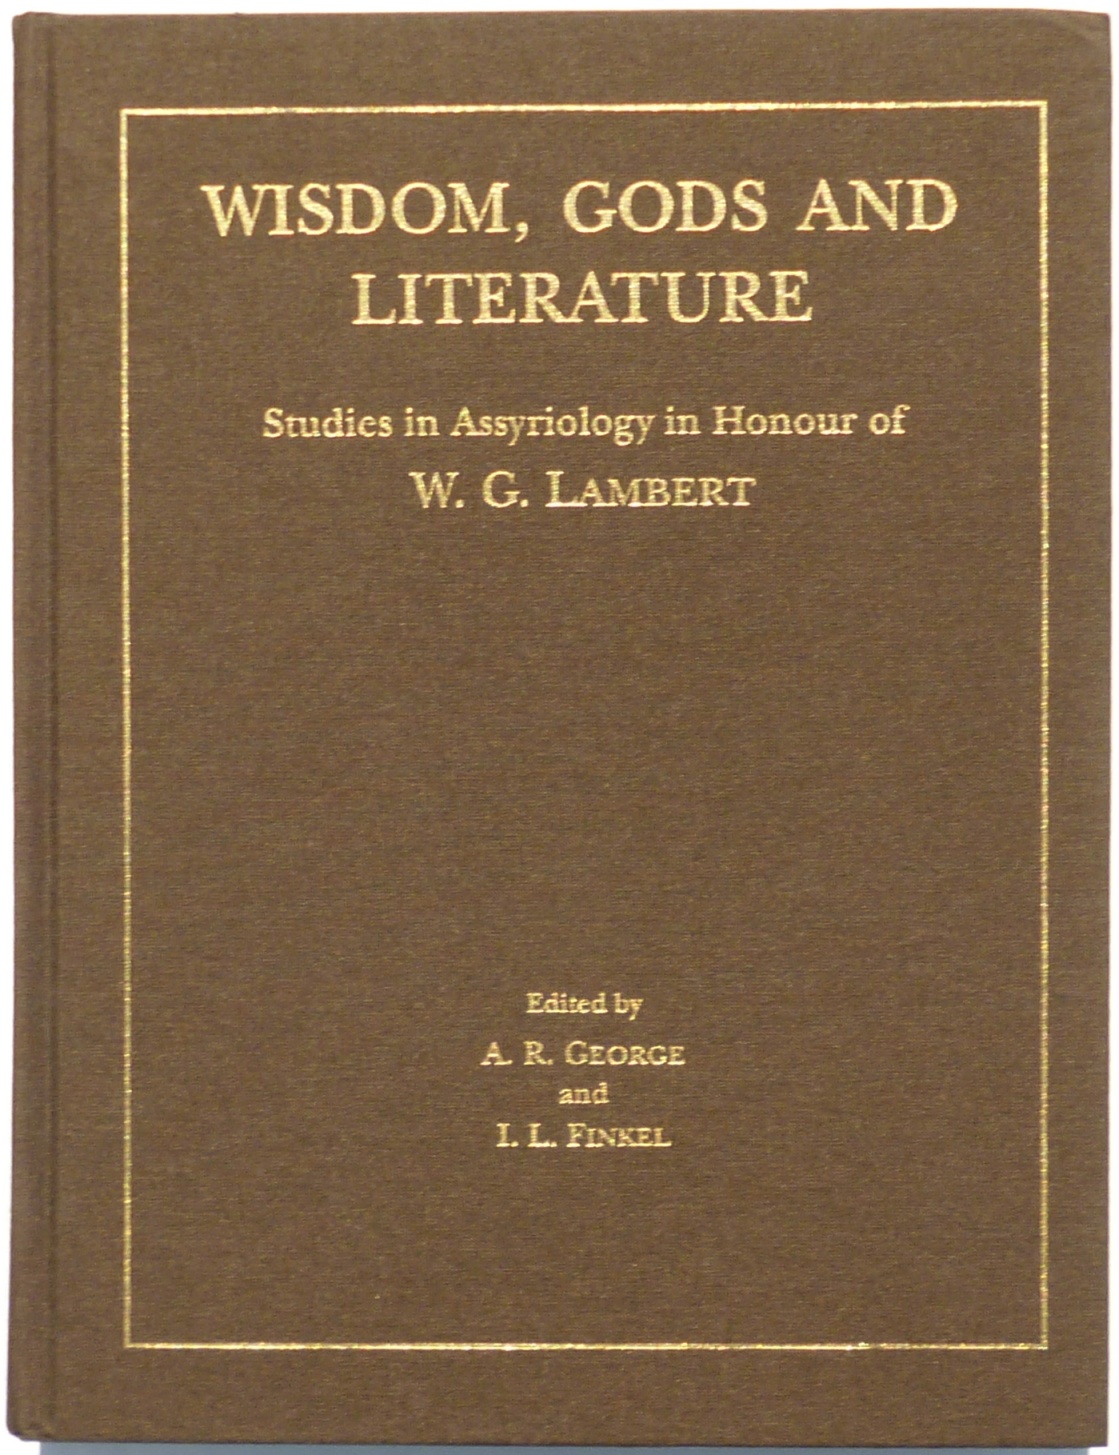 Wisdom, Gods and Literature : Studies in Assyriology in Honour of W. G. Lambert. - George, A. R. ; Finkel, Irving L. (eds.)